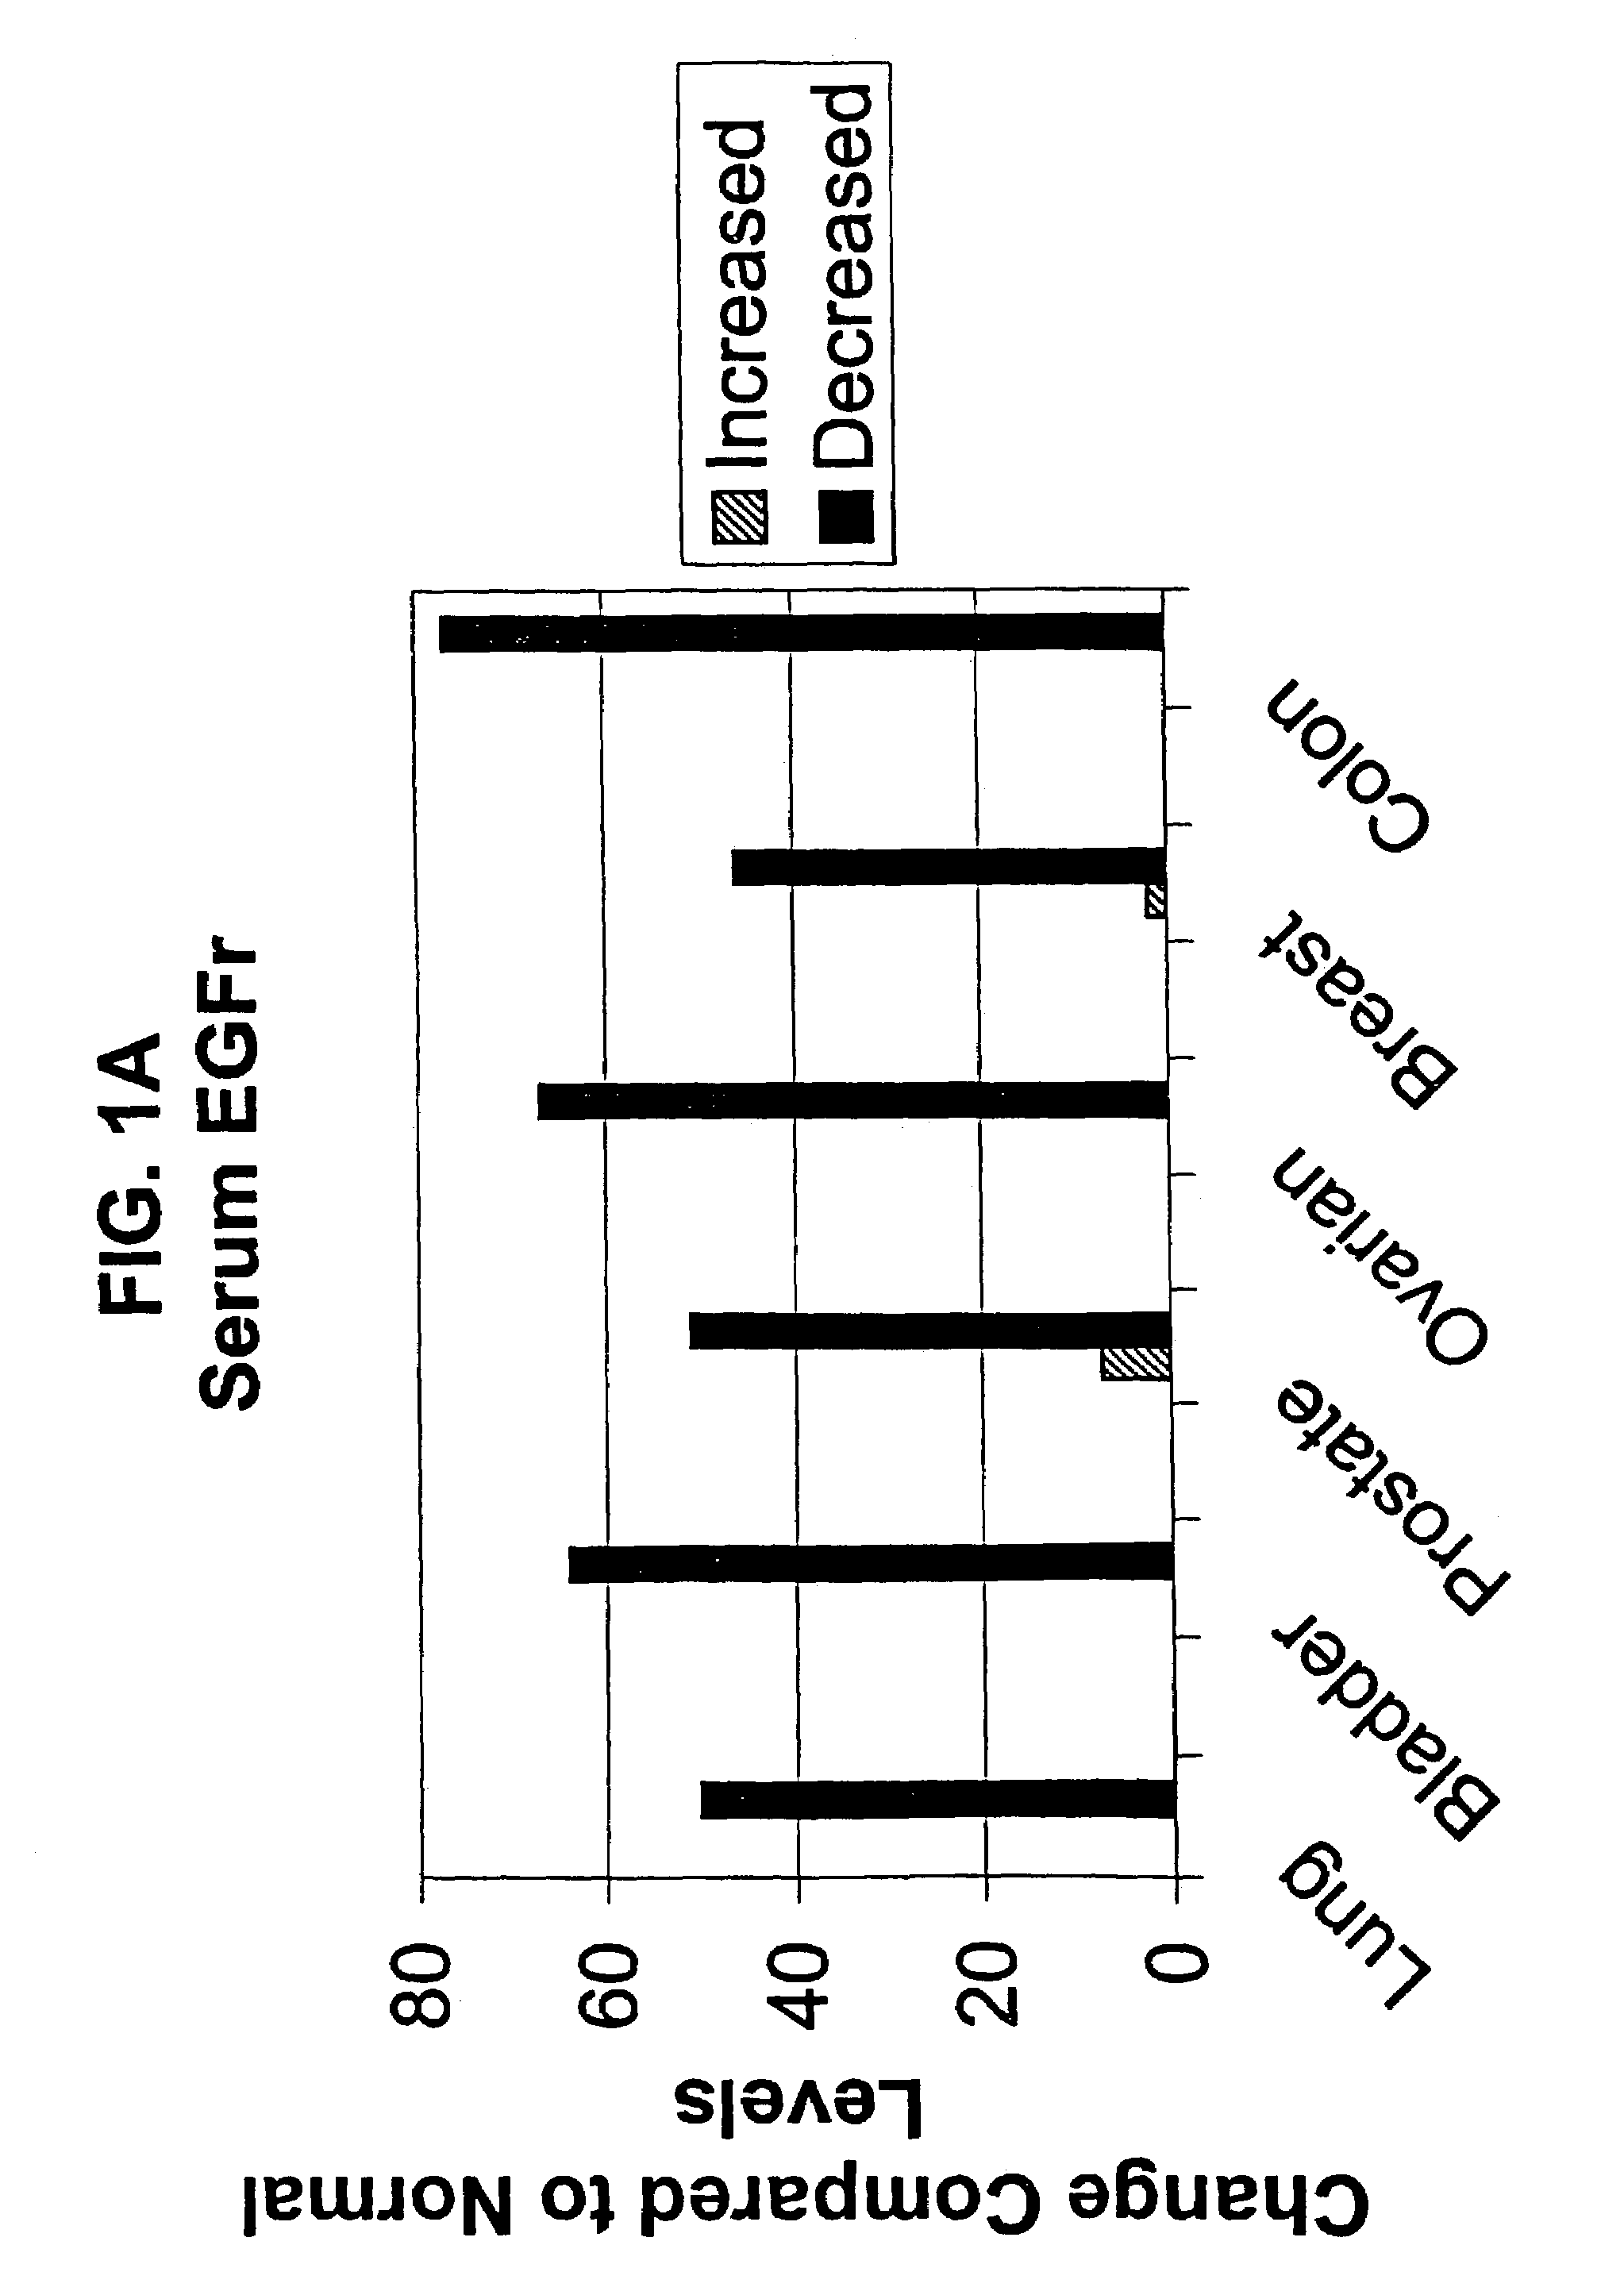 Assays for cancer patient monitoring based on levels of epidermal growth factor receptor (EGFR) extracellular domain (ECD) analyte, alone or in combination with other analytes, in body fluid samples